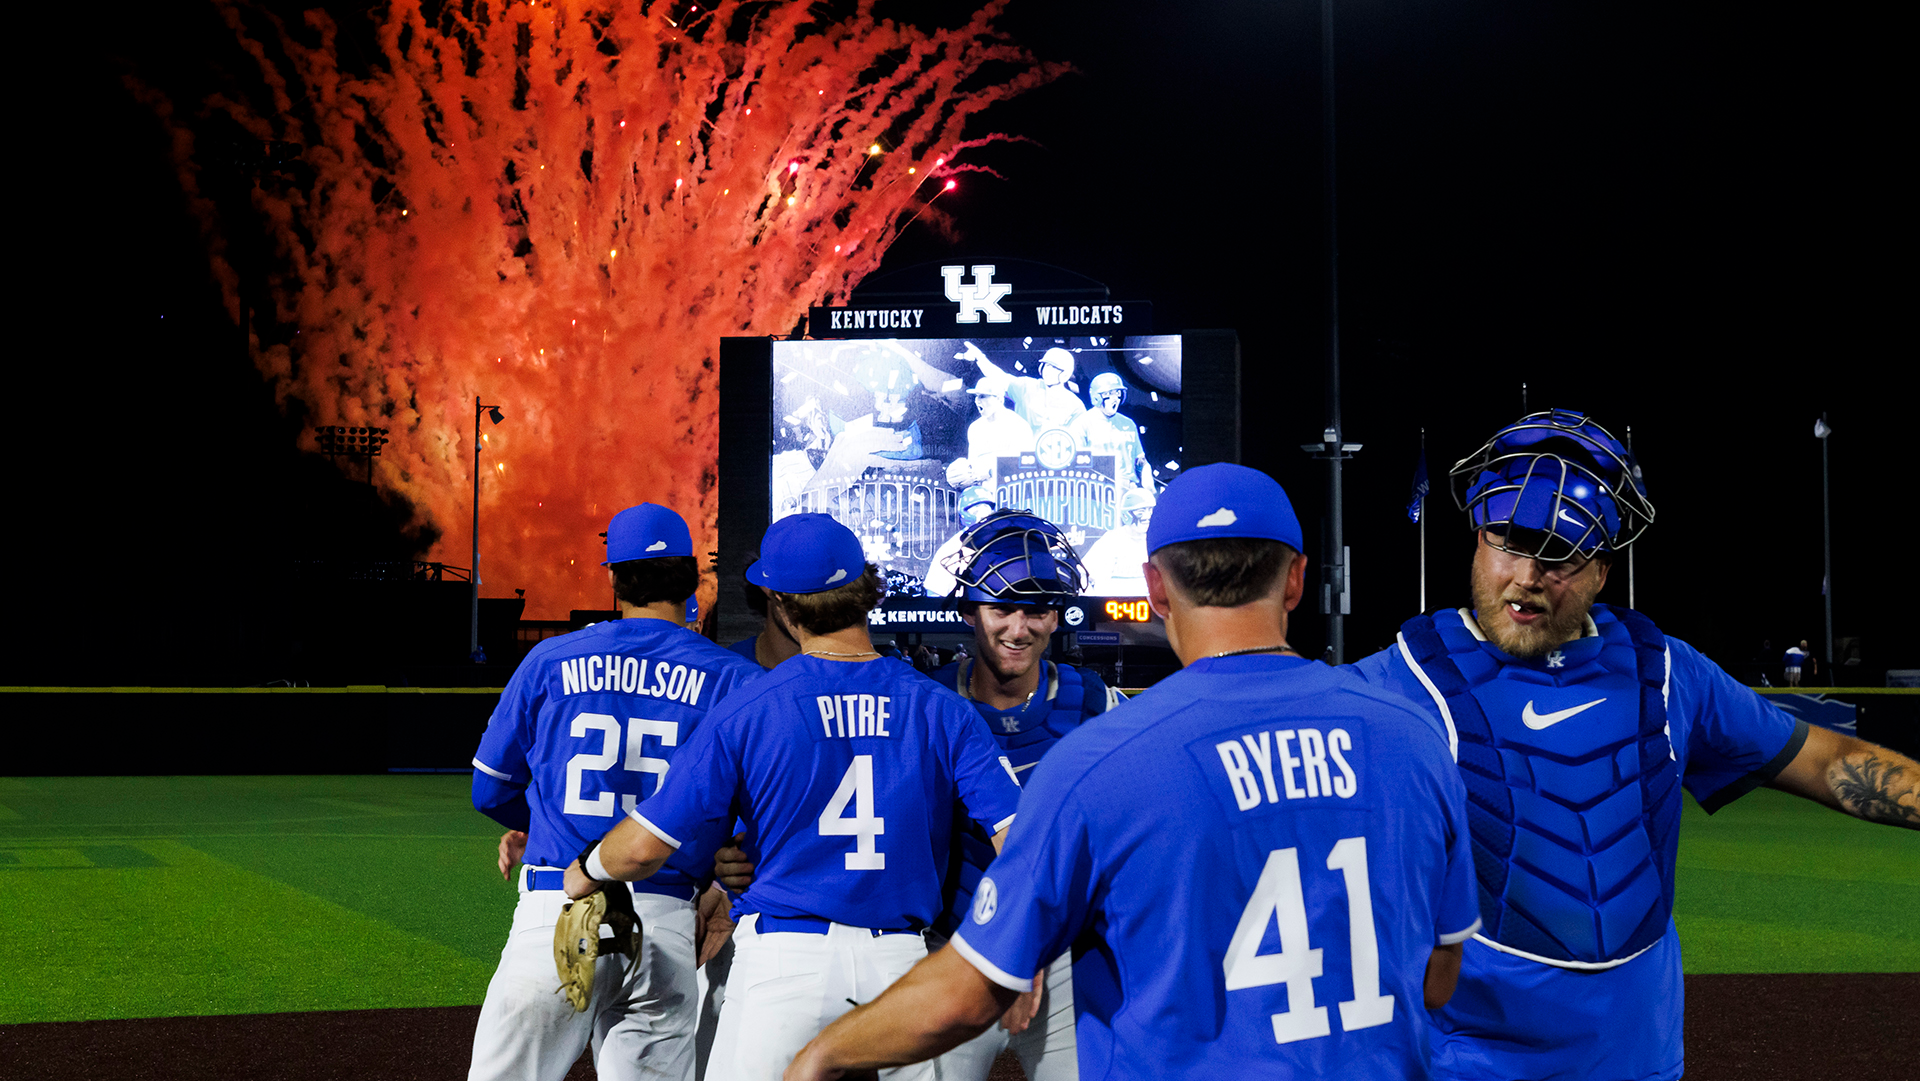 Experienced Core Group Leads Kentucky Baseball to SEC Title